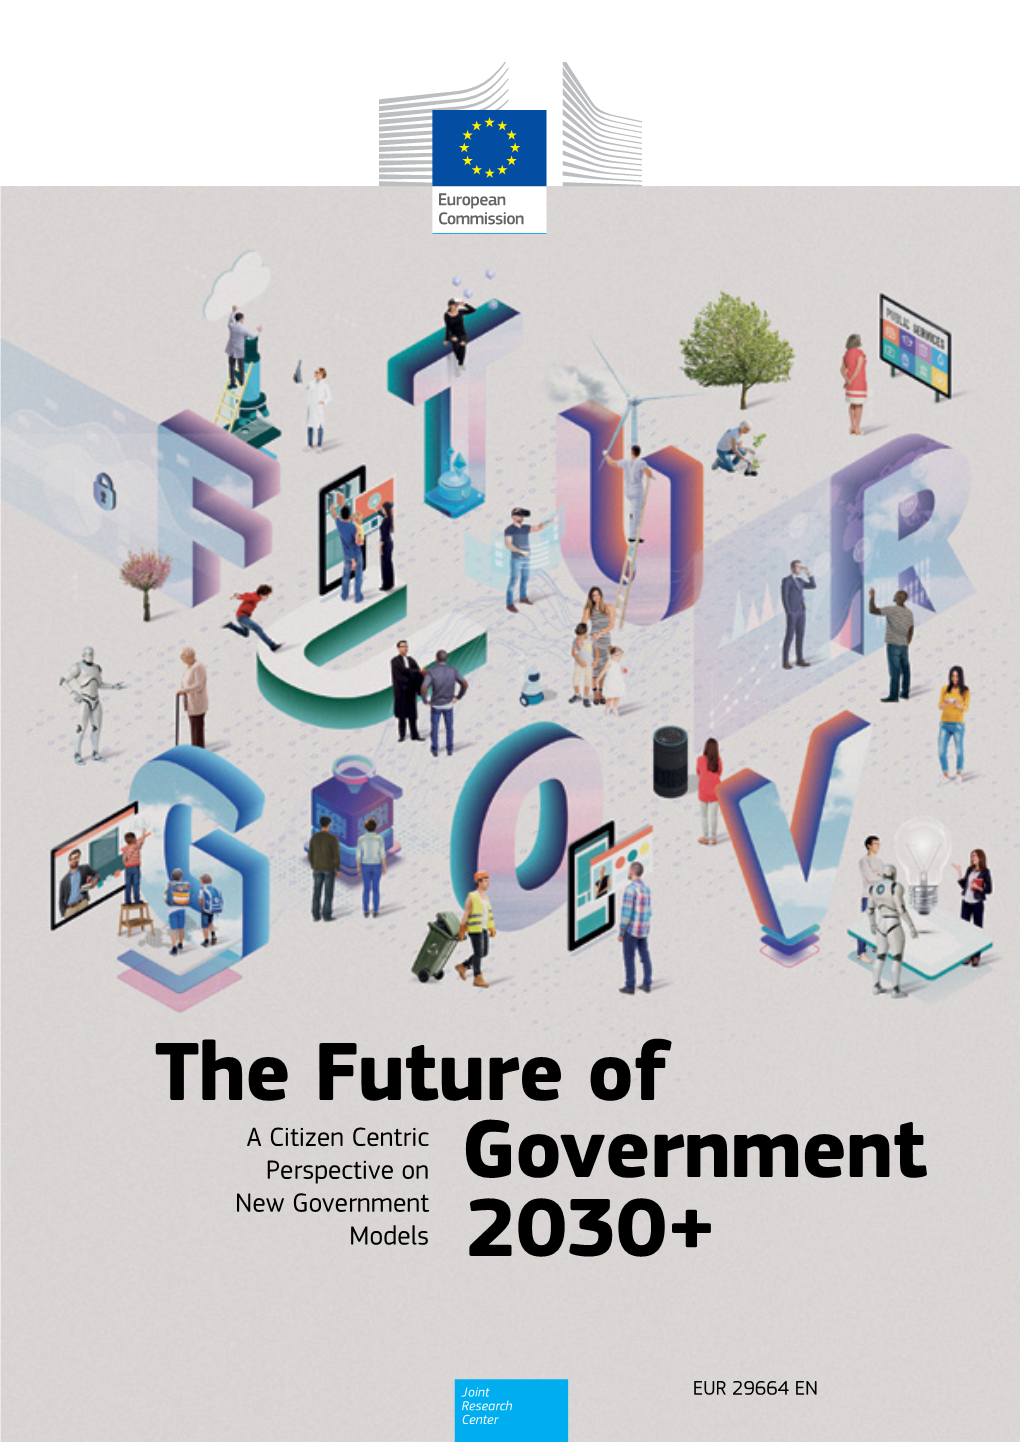 The Future of Government 2030+: a Citizen-Centric Perspective on New Government Models